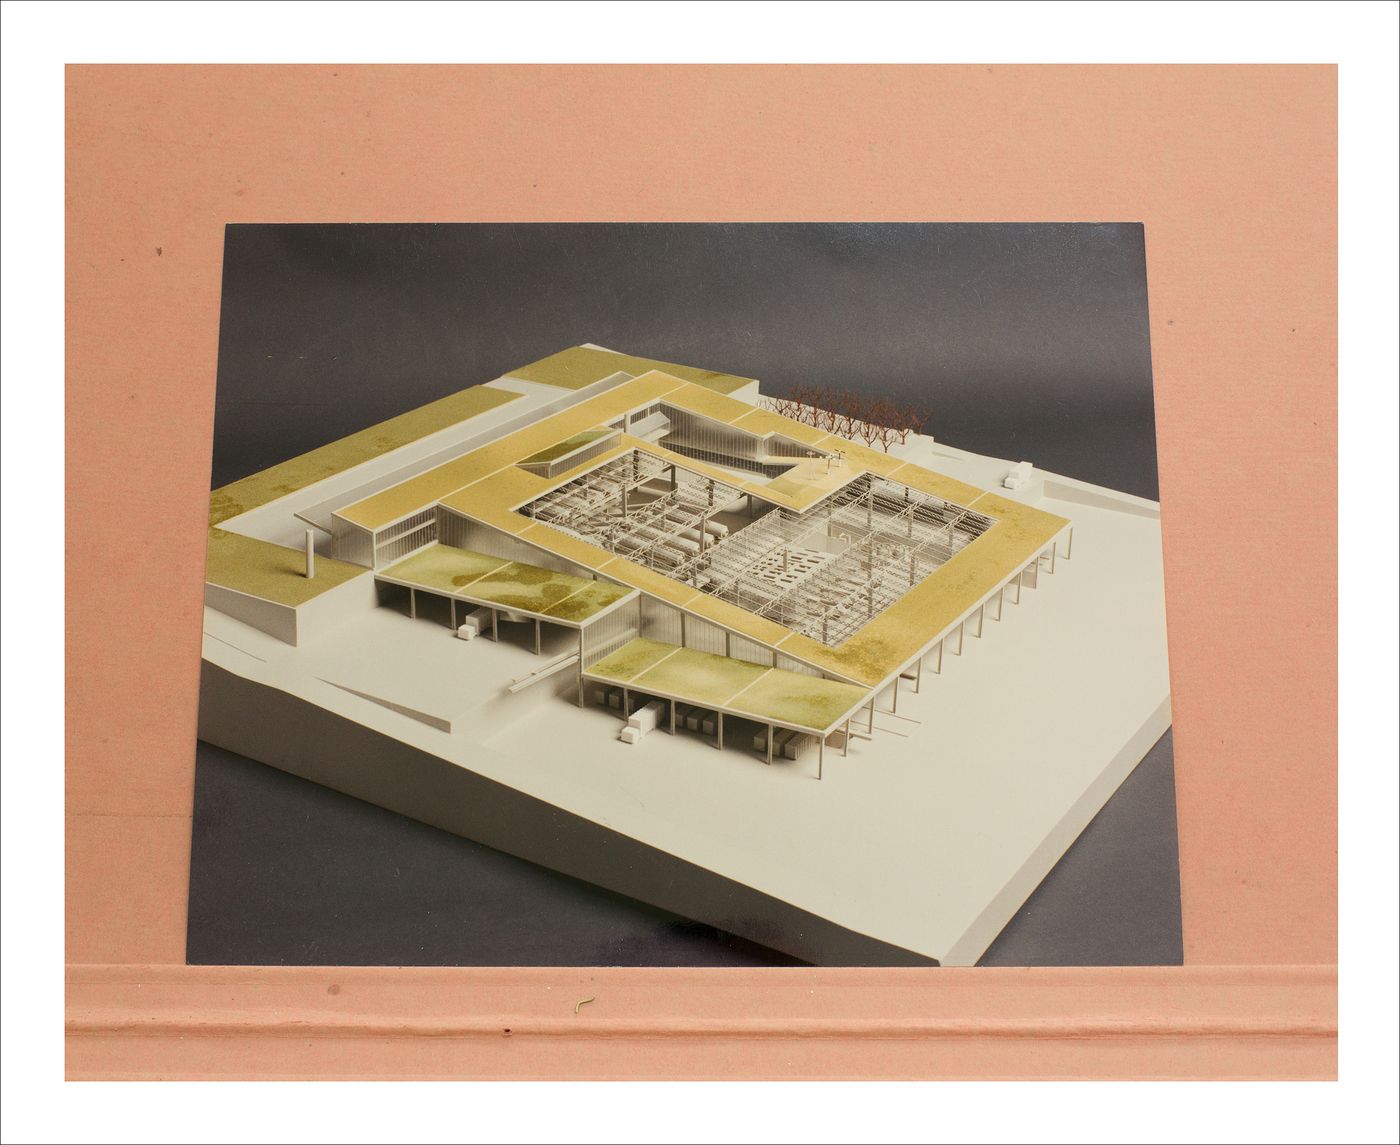 Proofs of Relevance: View of a photograph of a model showing the Urban Waste Treatmen Plant, Abalos & Herreros (1997-1999), Valdemingomez, Spain